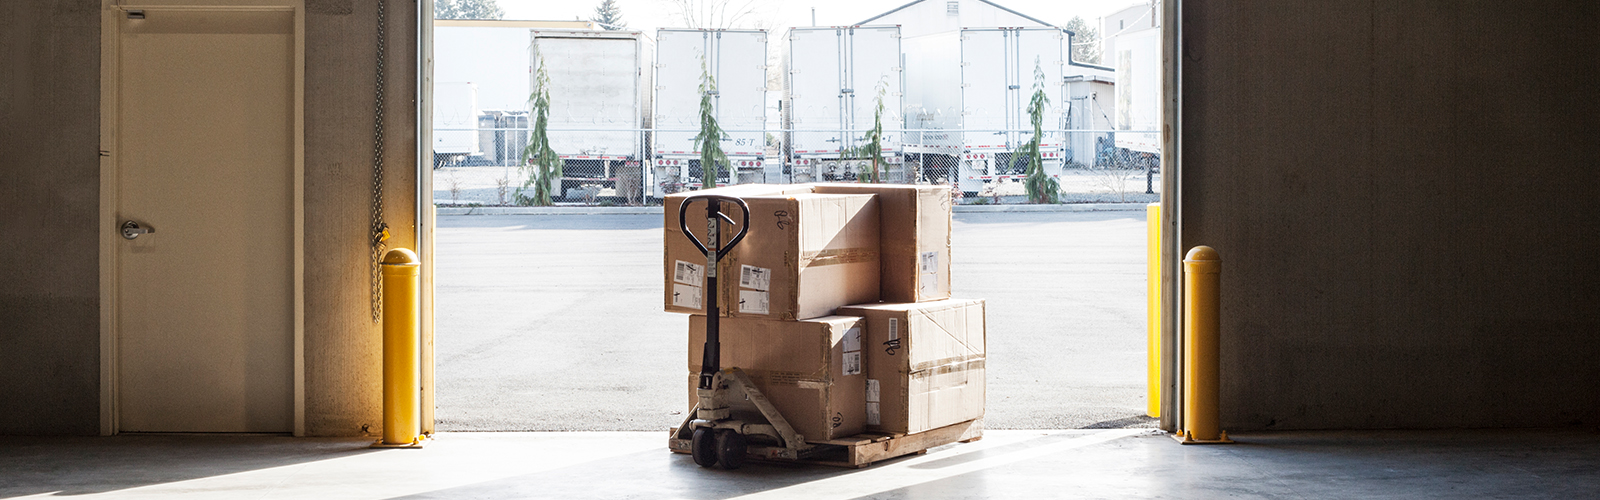 Maximizing Efficiency: Consolidation and Cross-Docking